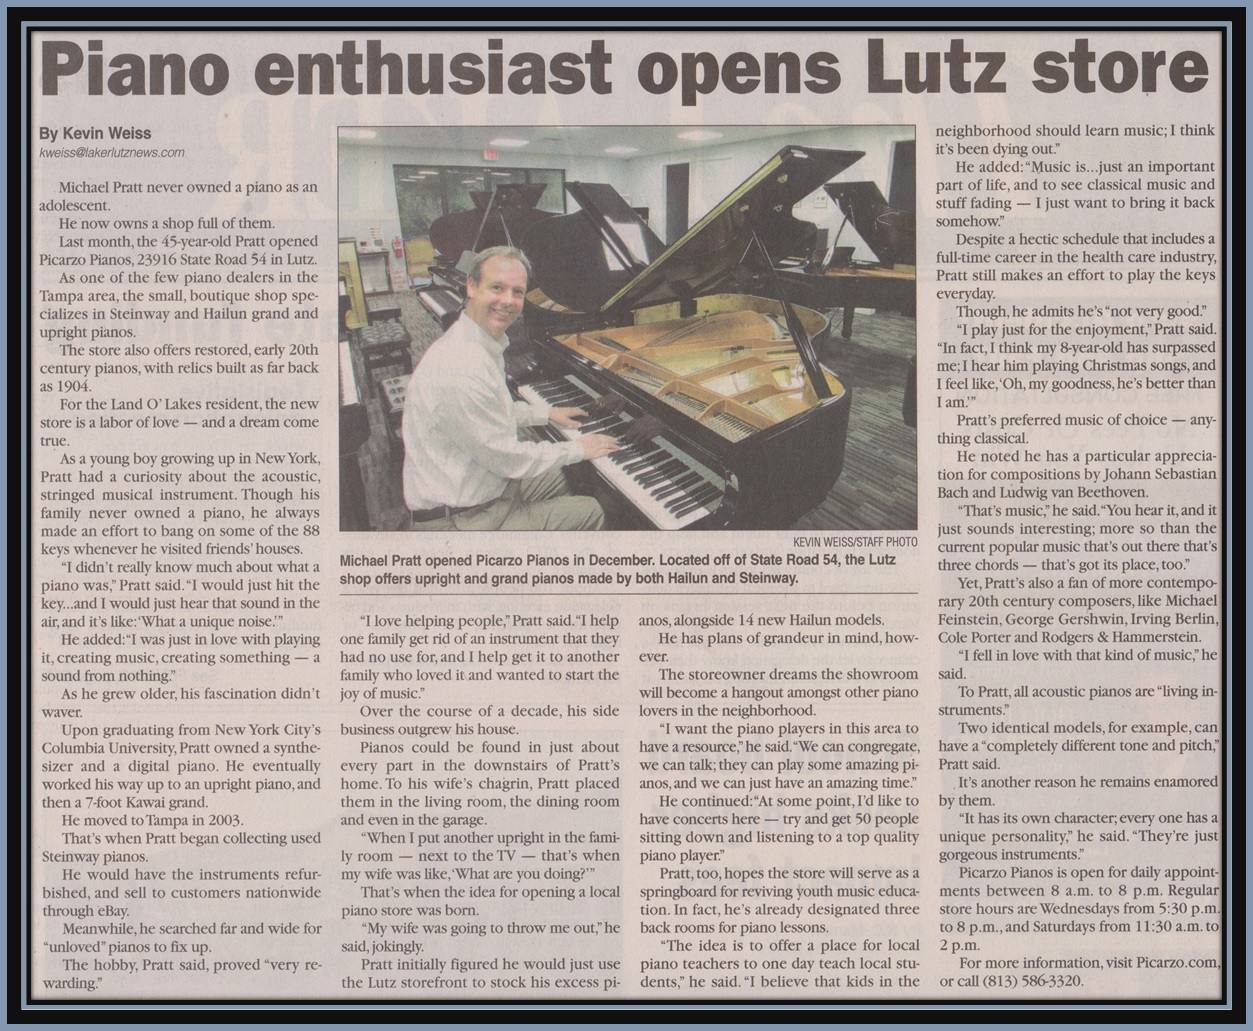 Picarzo Pianos In The News Article in Lutz Laker Newspaper